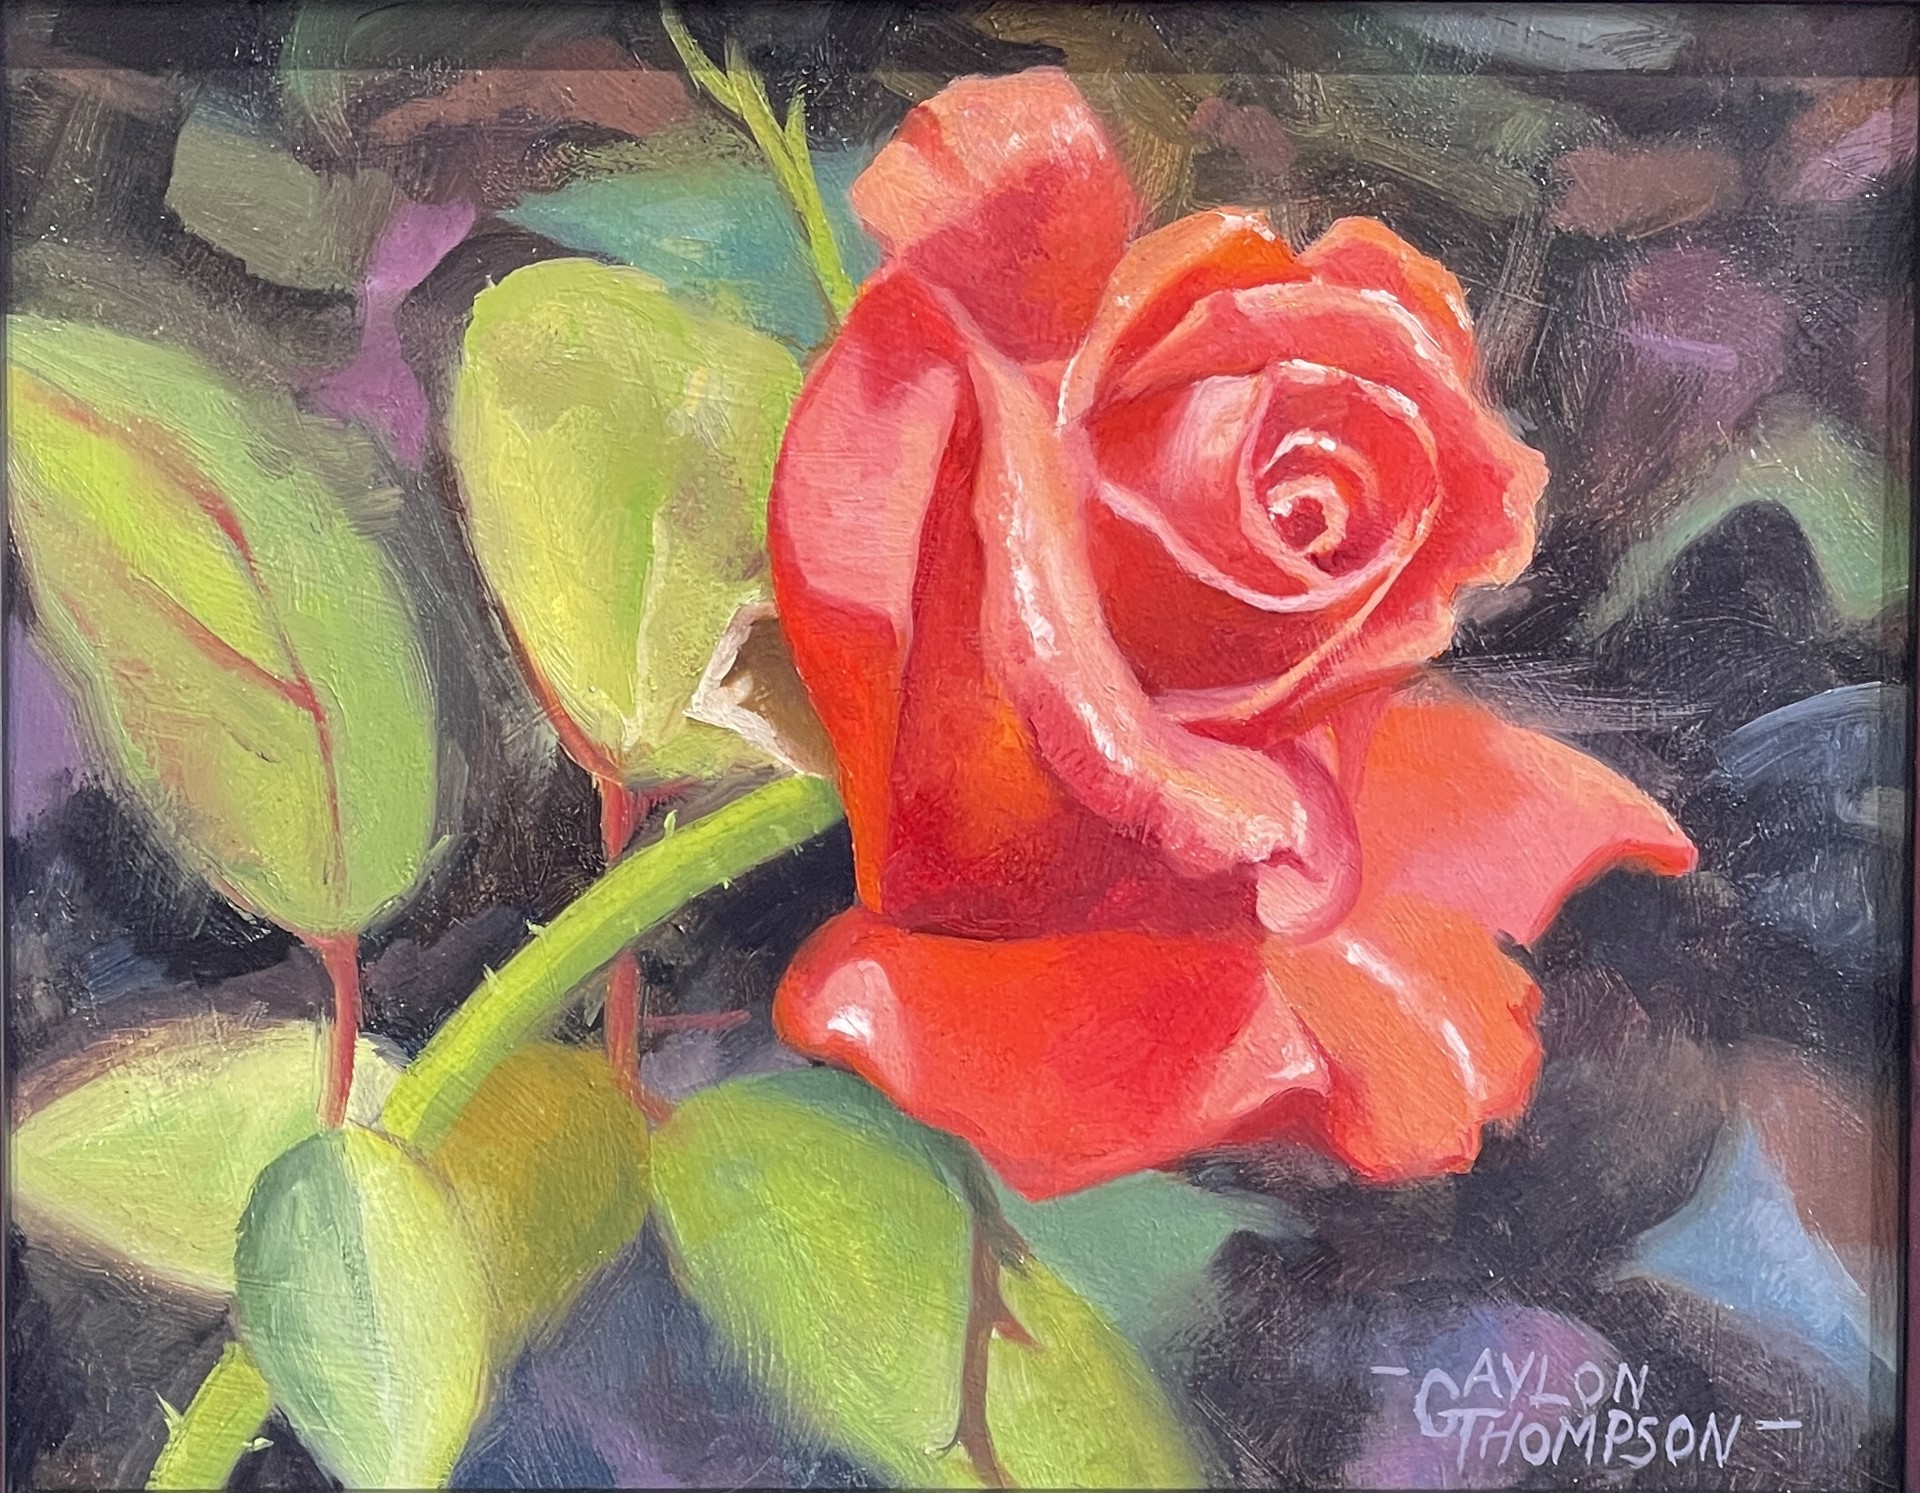 Rose Painting by Gaylon Thompson